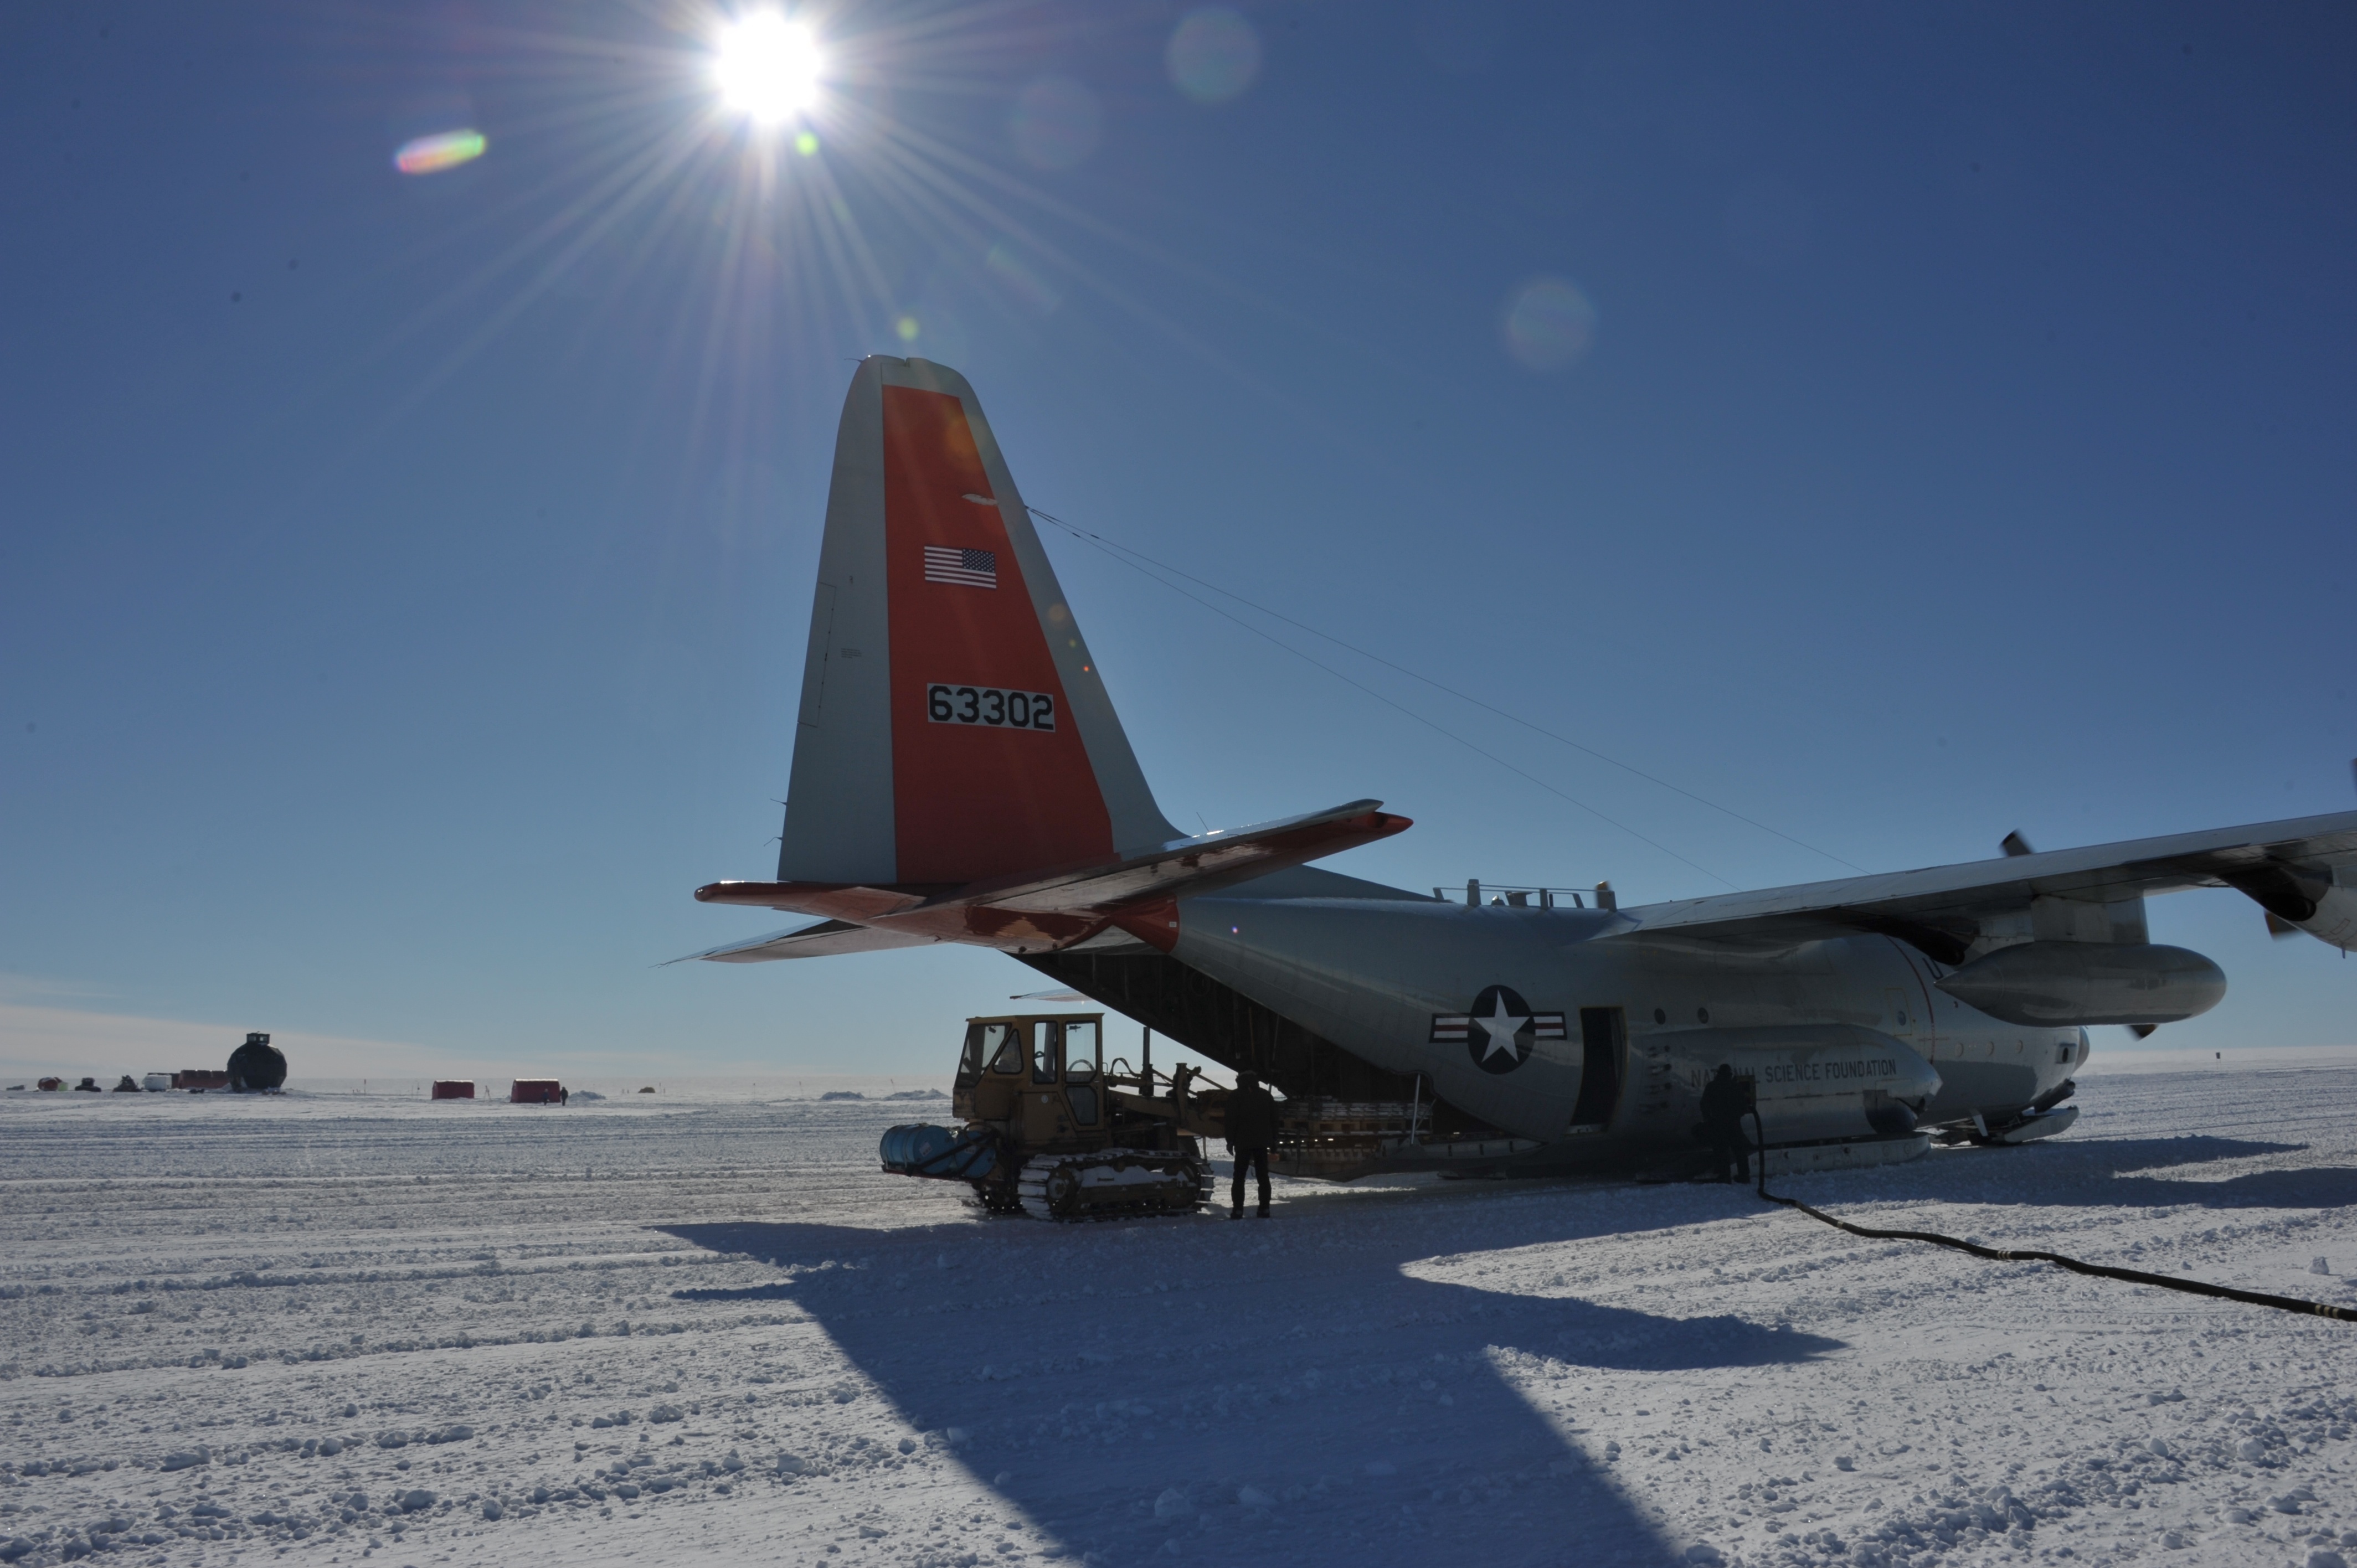 The Caterpillar is loading the LC-130 with cargo to be sent back to Kangerlussuaq